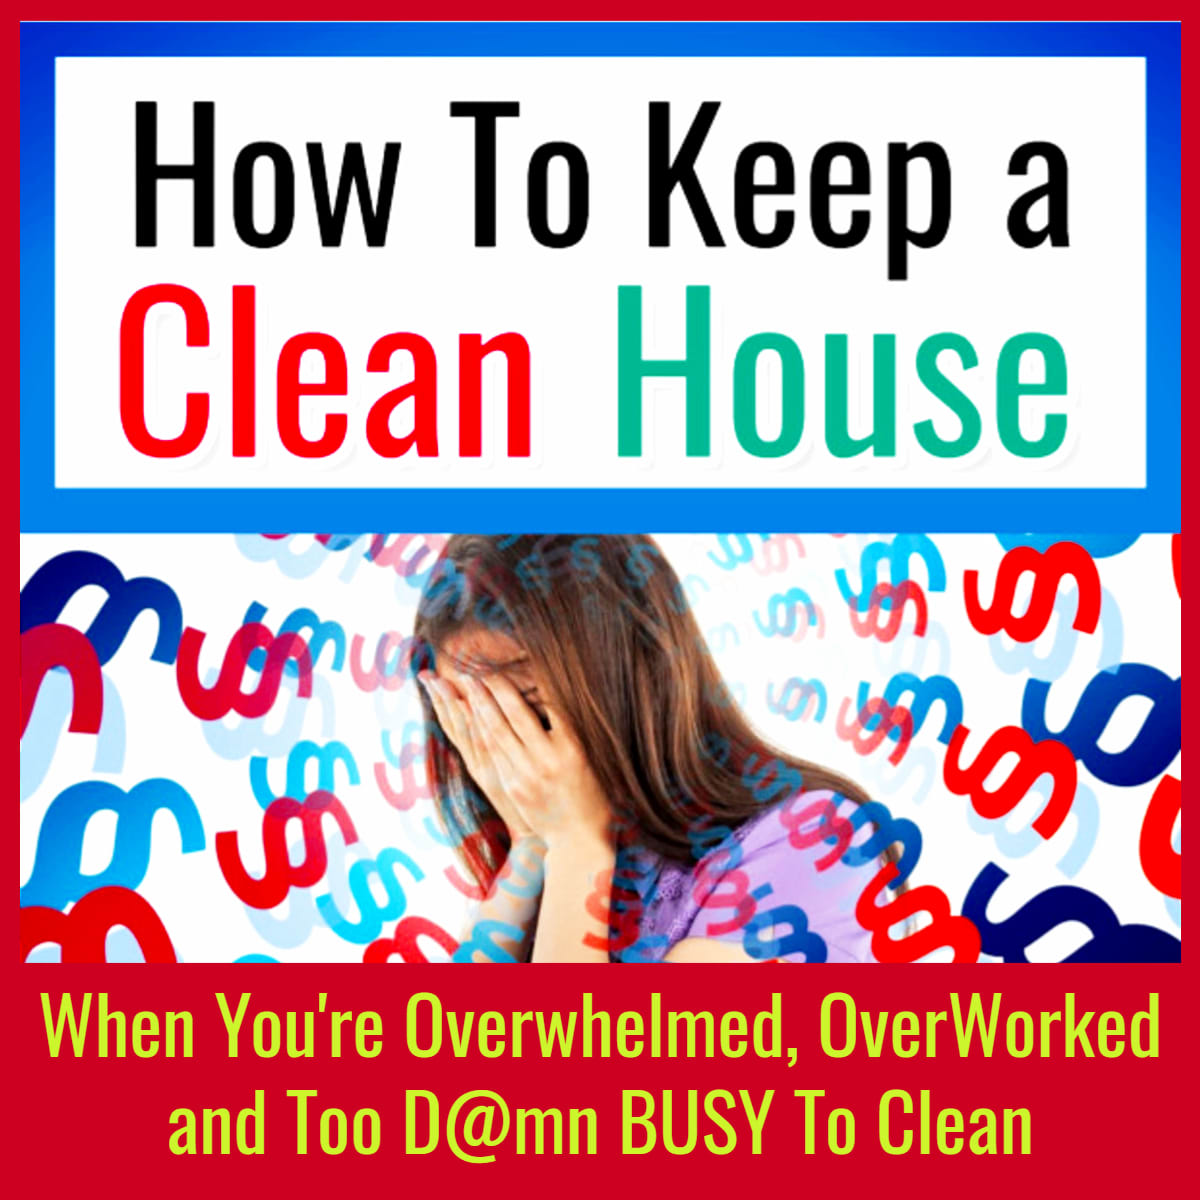 Cleaning Hacks for Moms!  Wondering how to keep house clean when busy ALL THE TIME?  These house cleaning tips for working moms and cleaning hacks for busy moms are super useful life hacks... includes speed cleaning for moms, working mom cleaning schedule, working mom cleaning routine and many more Mom Hacks for getting organized at home and clearing the clutter! Let's Declutter and Clean the EASY way!